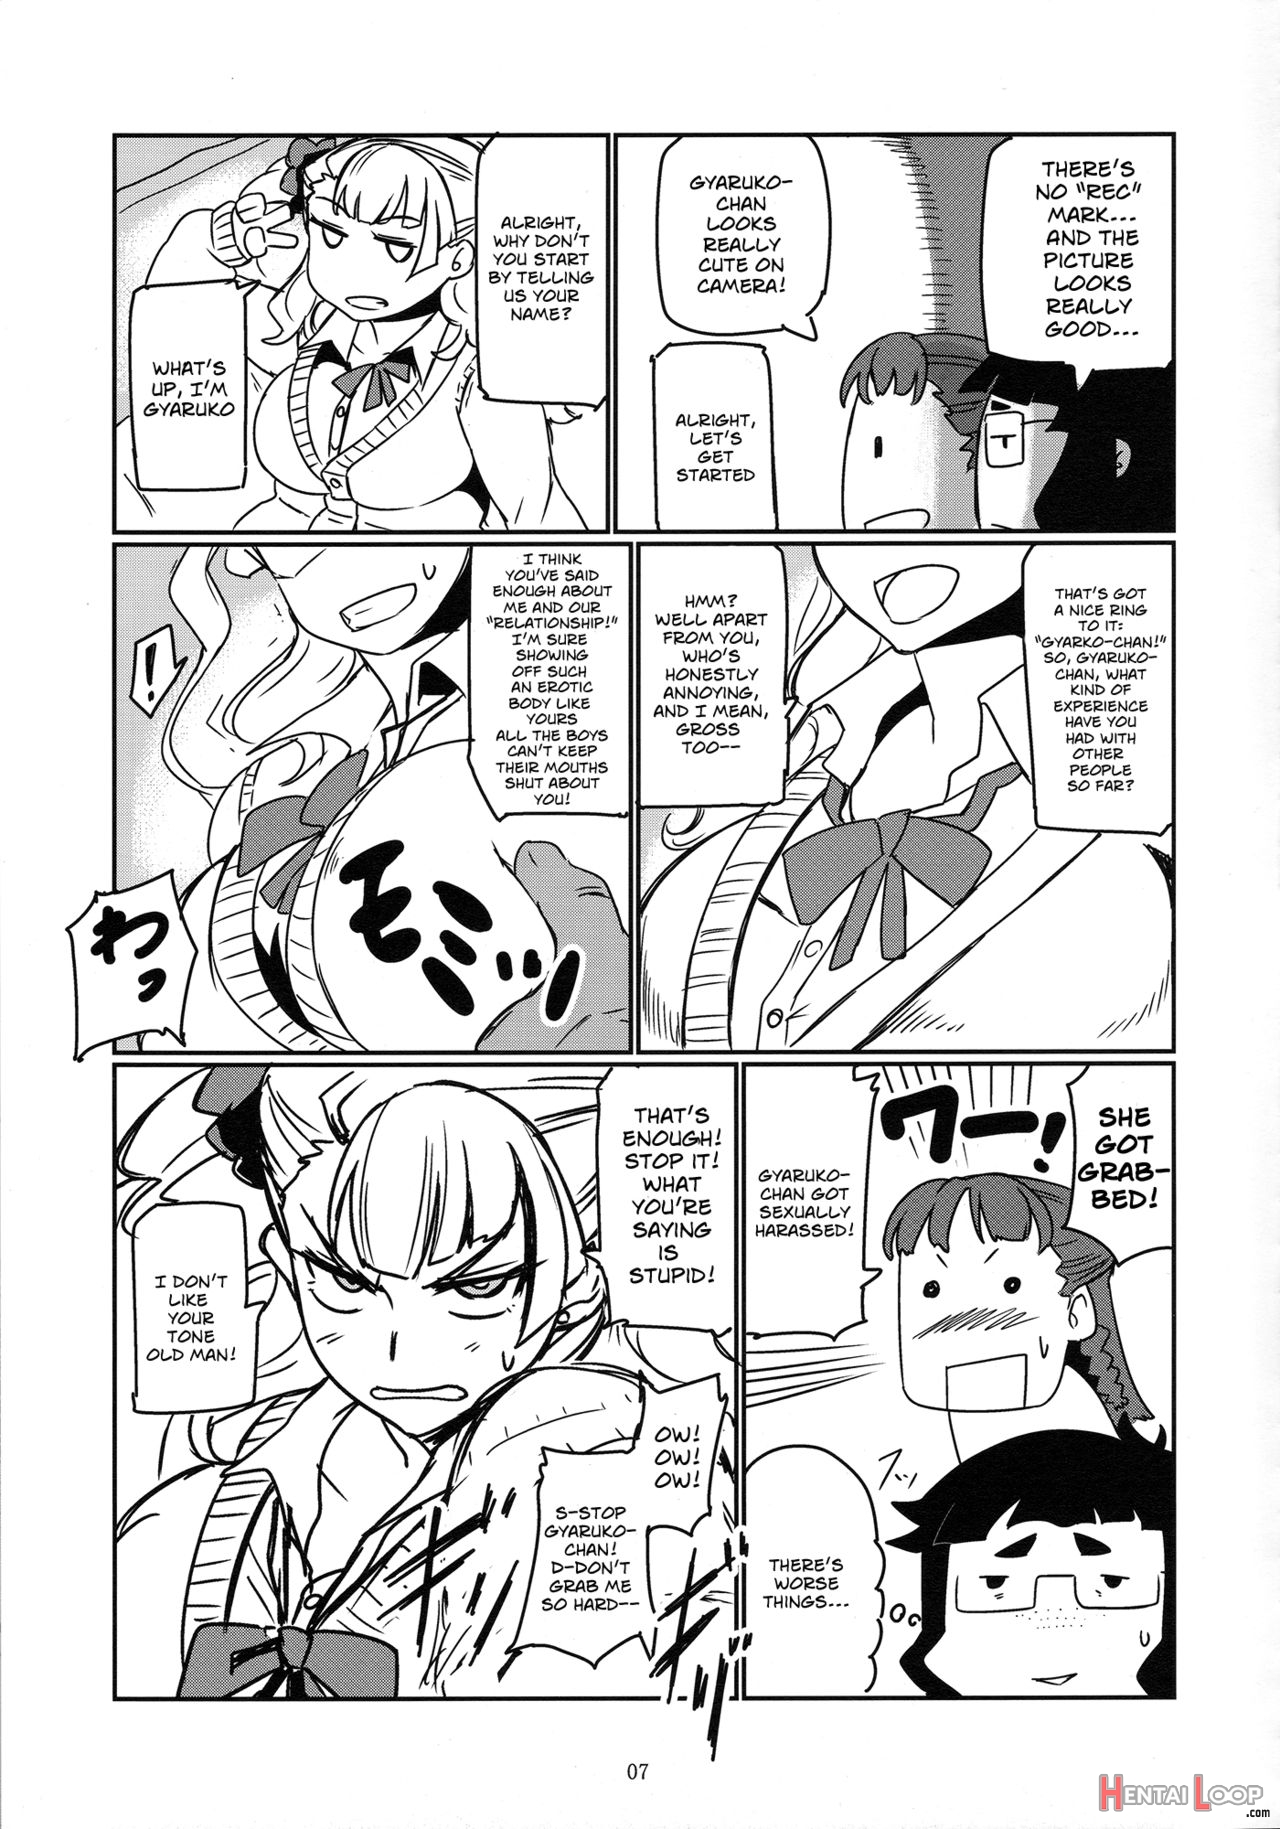 Galko Ah! page 6